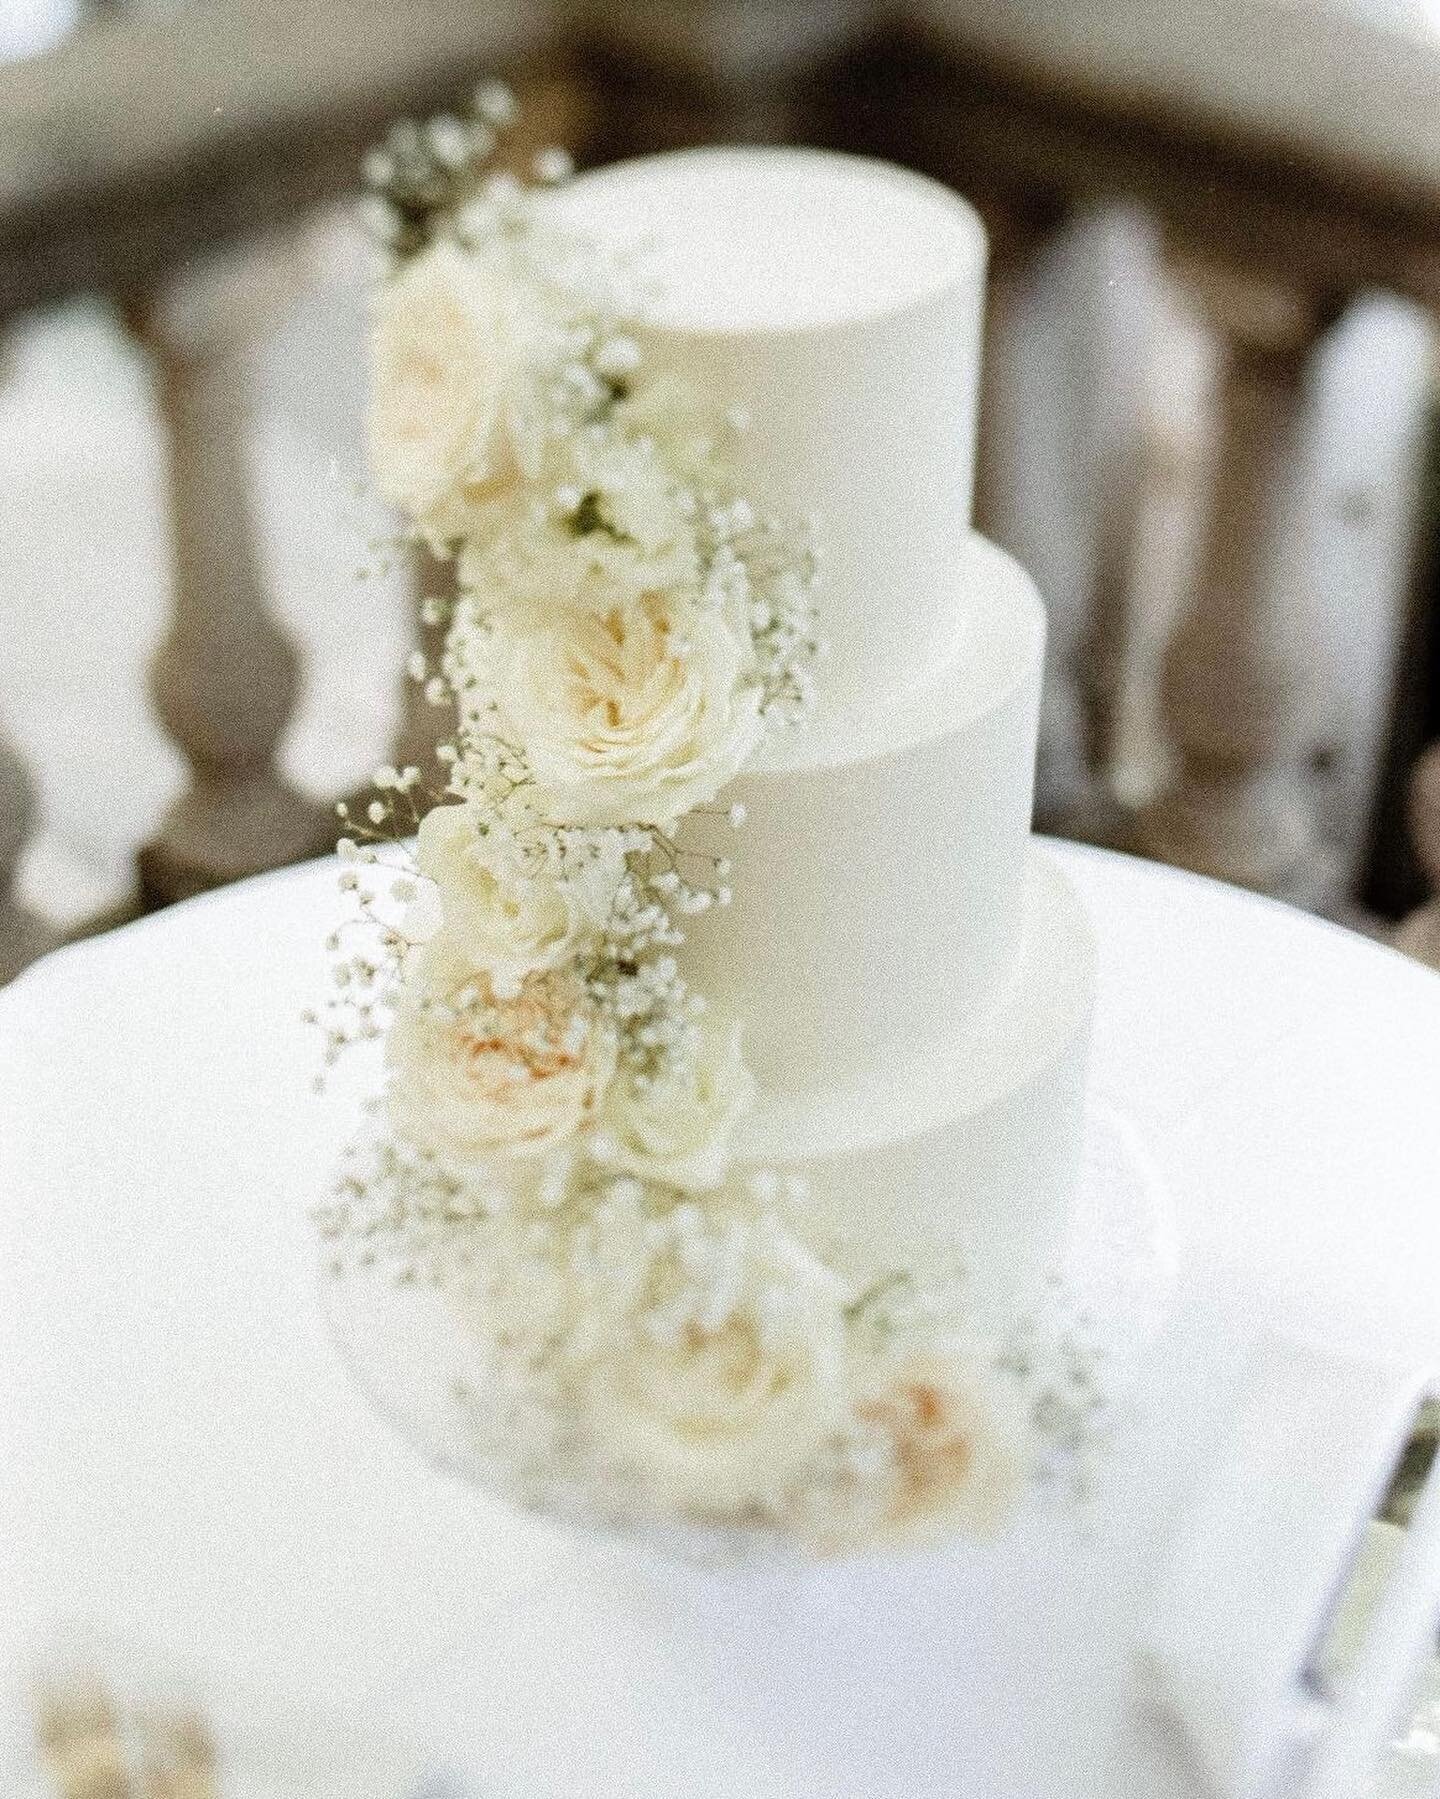 Wedding season has officially begun! We can&rsquo;t wait to create and share all the beautiful wedding cakes we have the pleasure of making in 2023! (Including my own in September!🙊)

Photo from June 2022 wedding at @graydonhallmanor photographed by